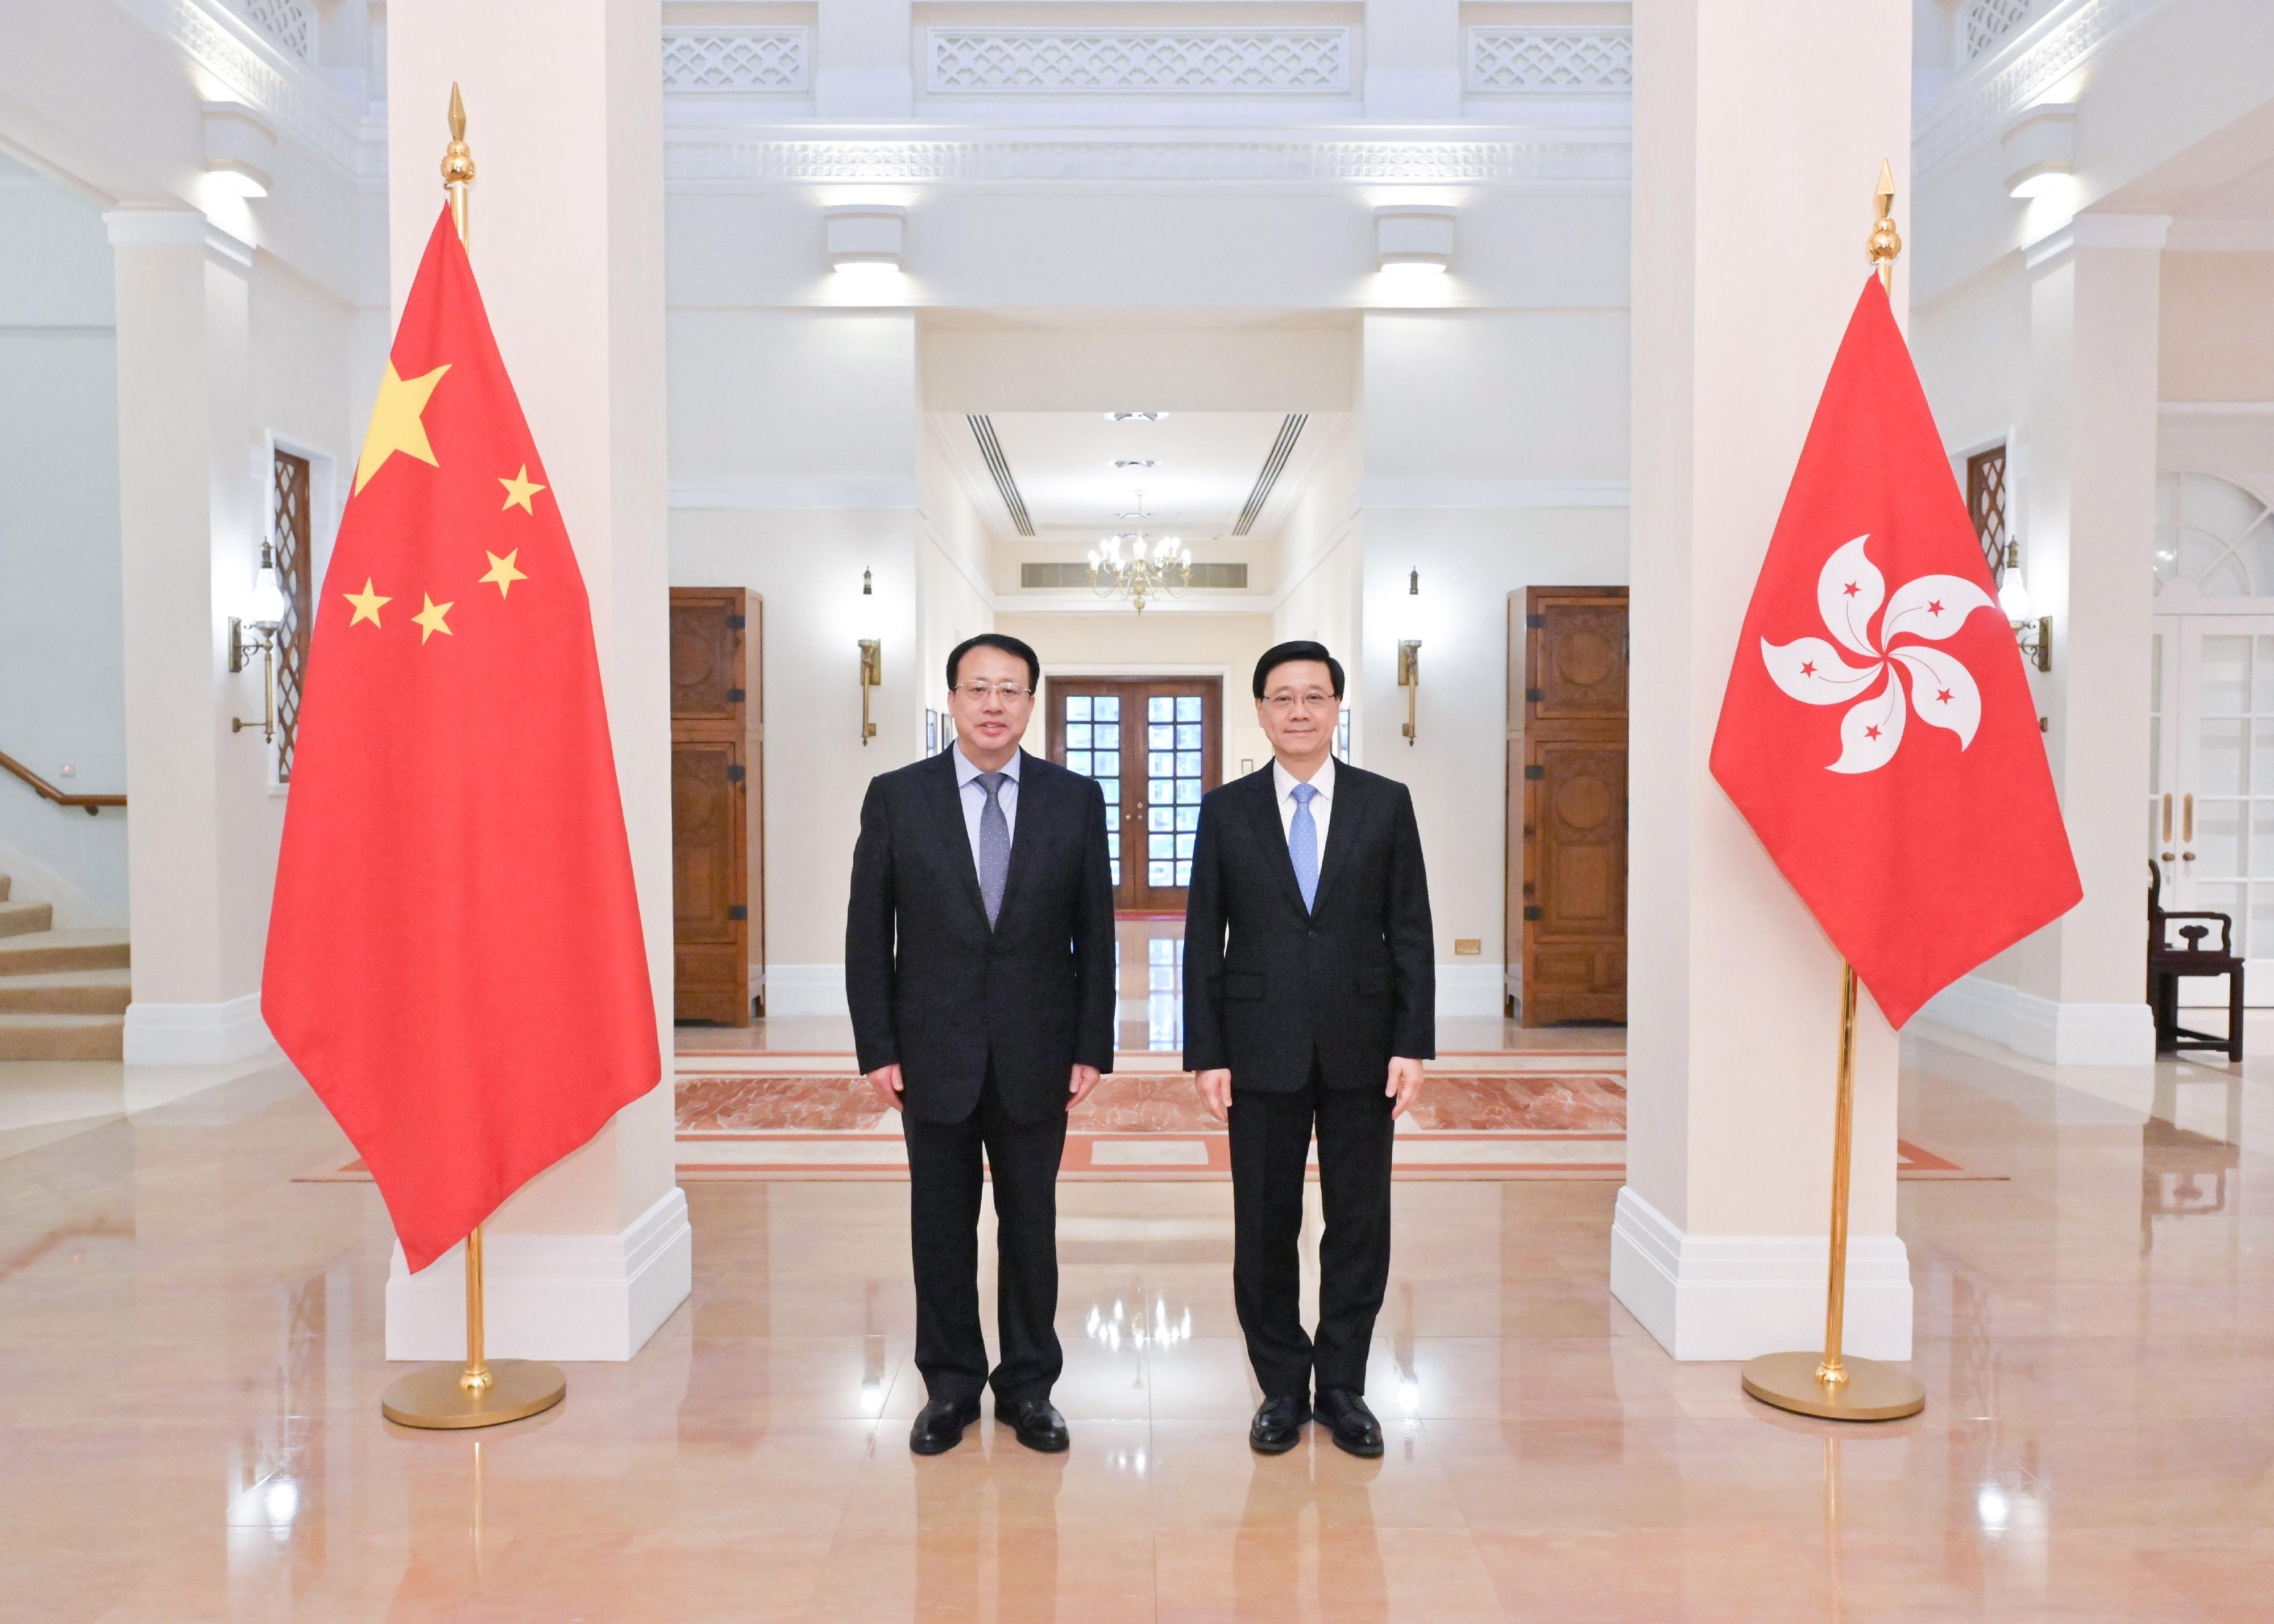 The Chief Executive, Mr John Lee (right), meets with the Mayor of Shanghai, Mr Gong Zheng (left), at Government House today (April 26).